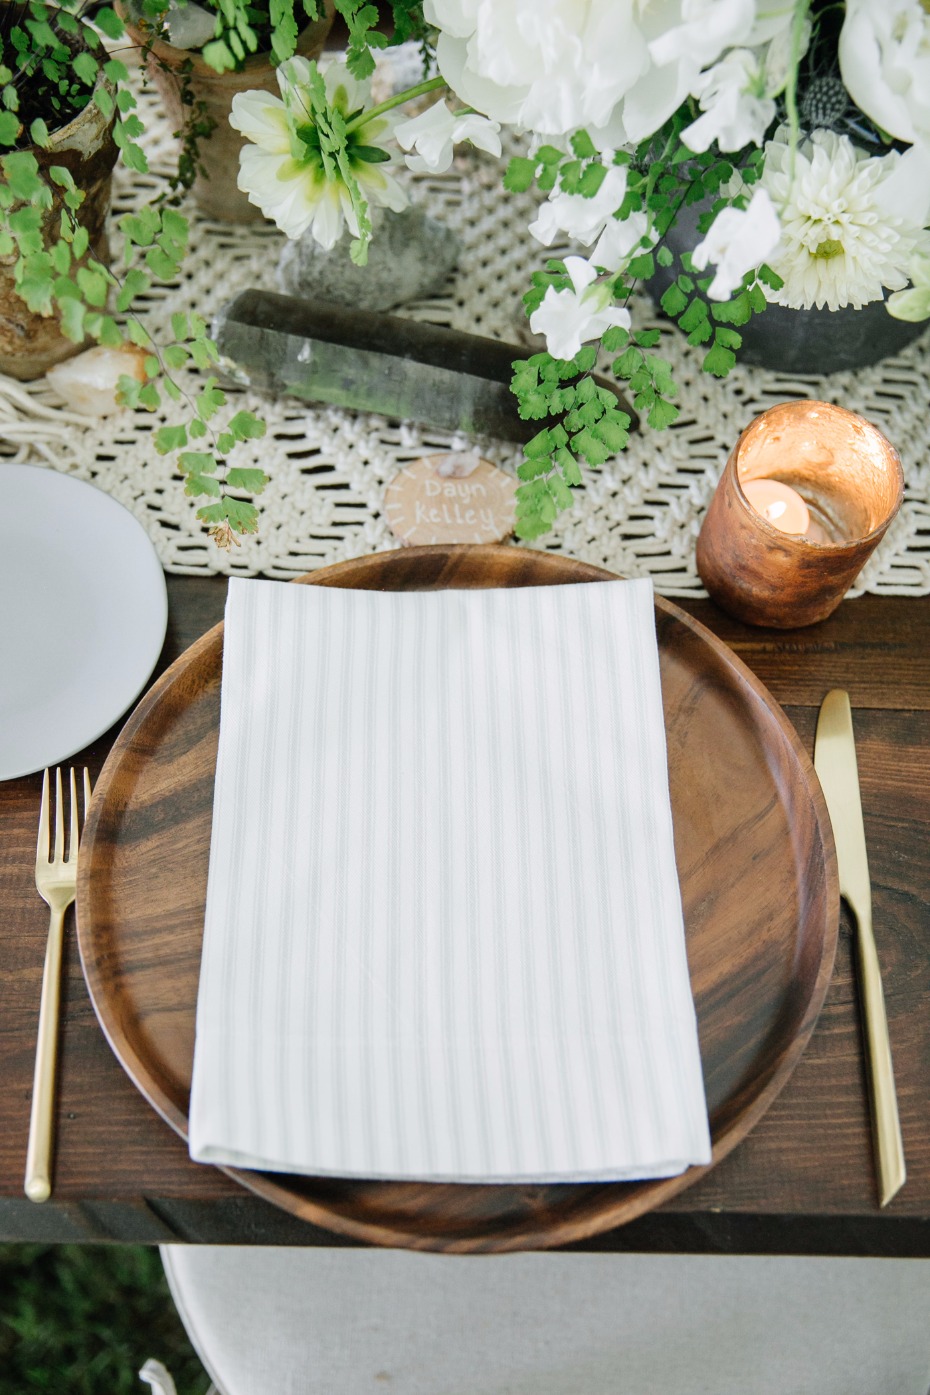 Wood plates and gold flatware